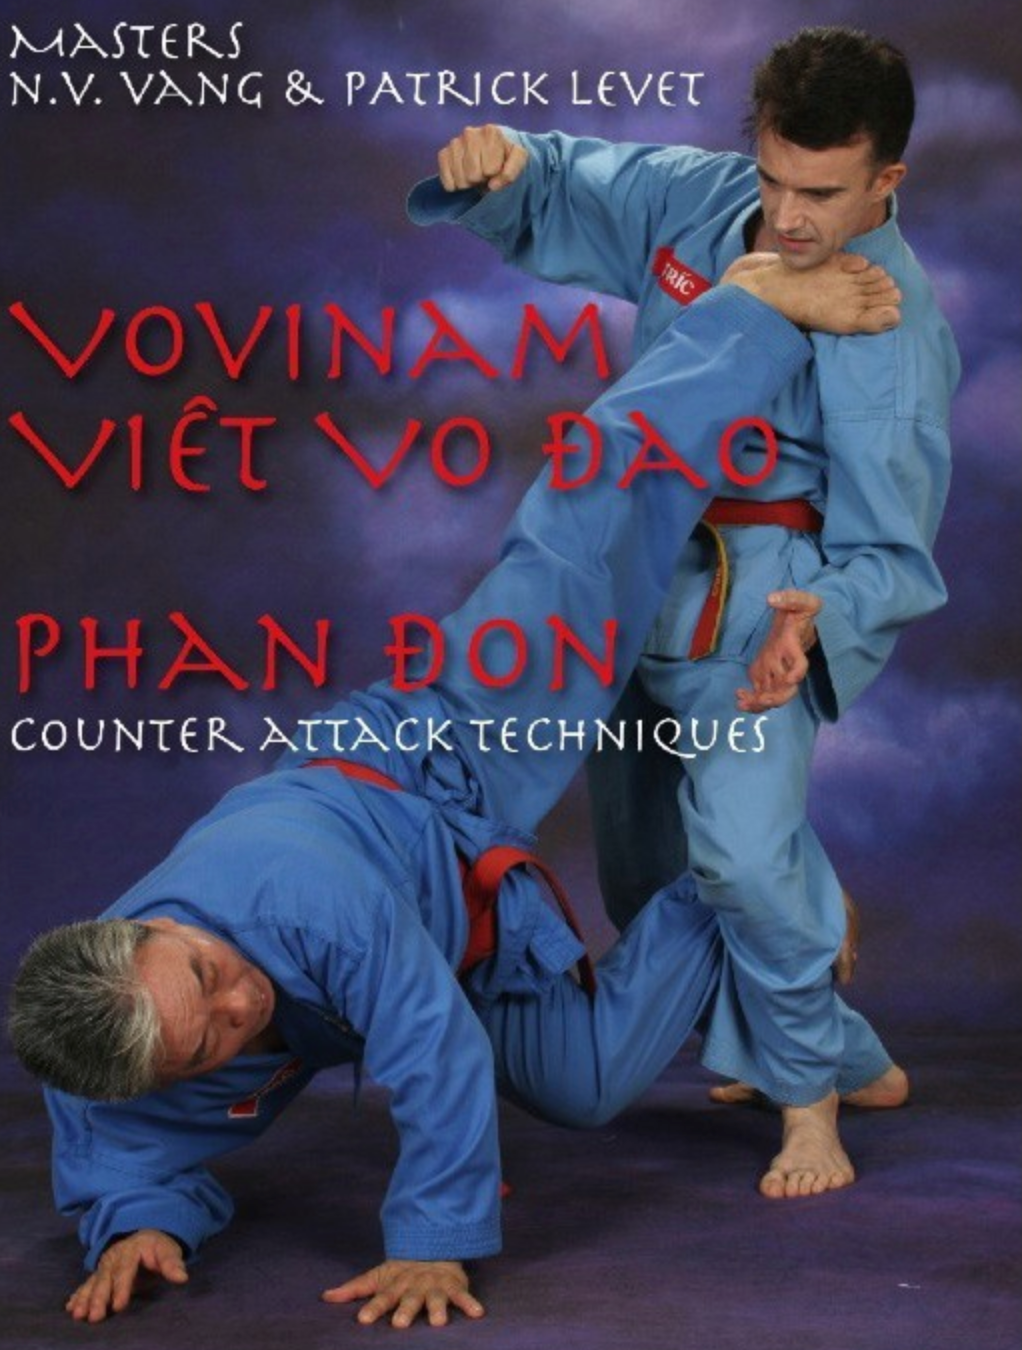 Viet Vo Dao Phan Don Counter Techniques DVD with Patrick Levet - Budovideos Inc